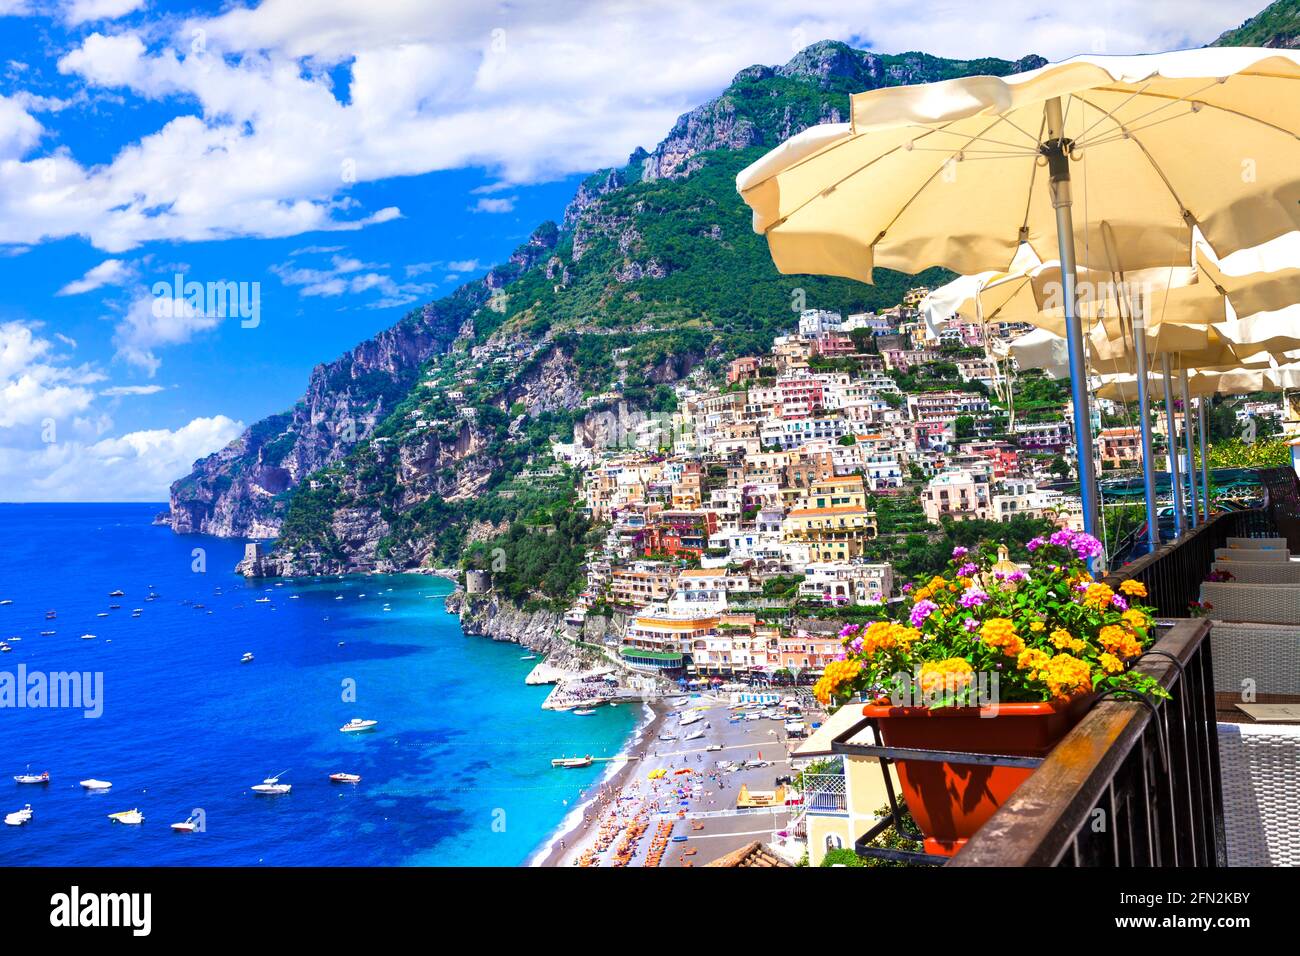 Amalfi coast of Italy. Positano town. one of the most scenic places for summer holidays. Campania Stock Photo